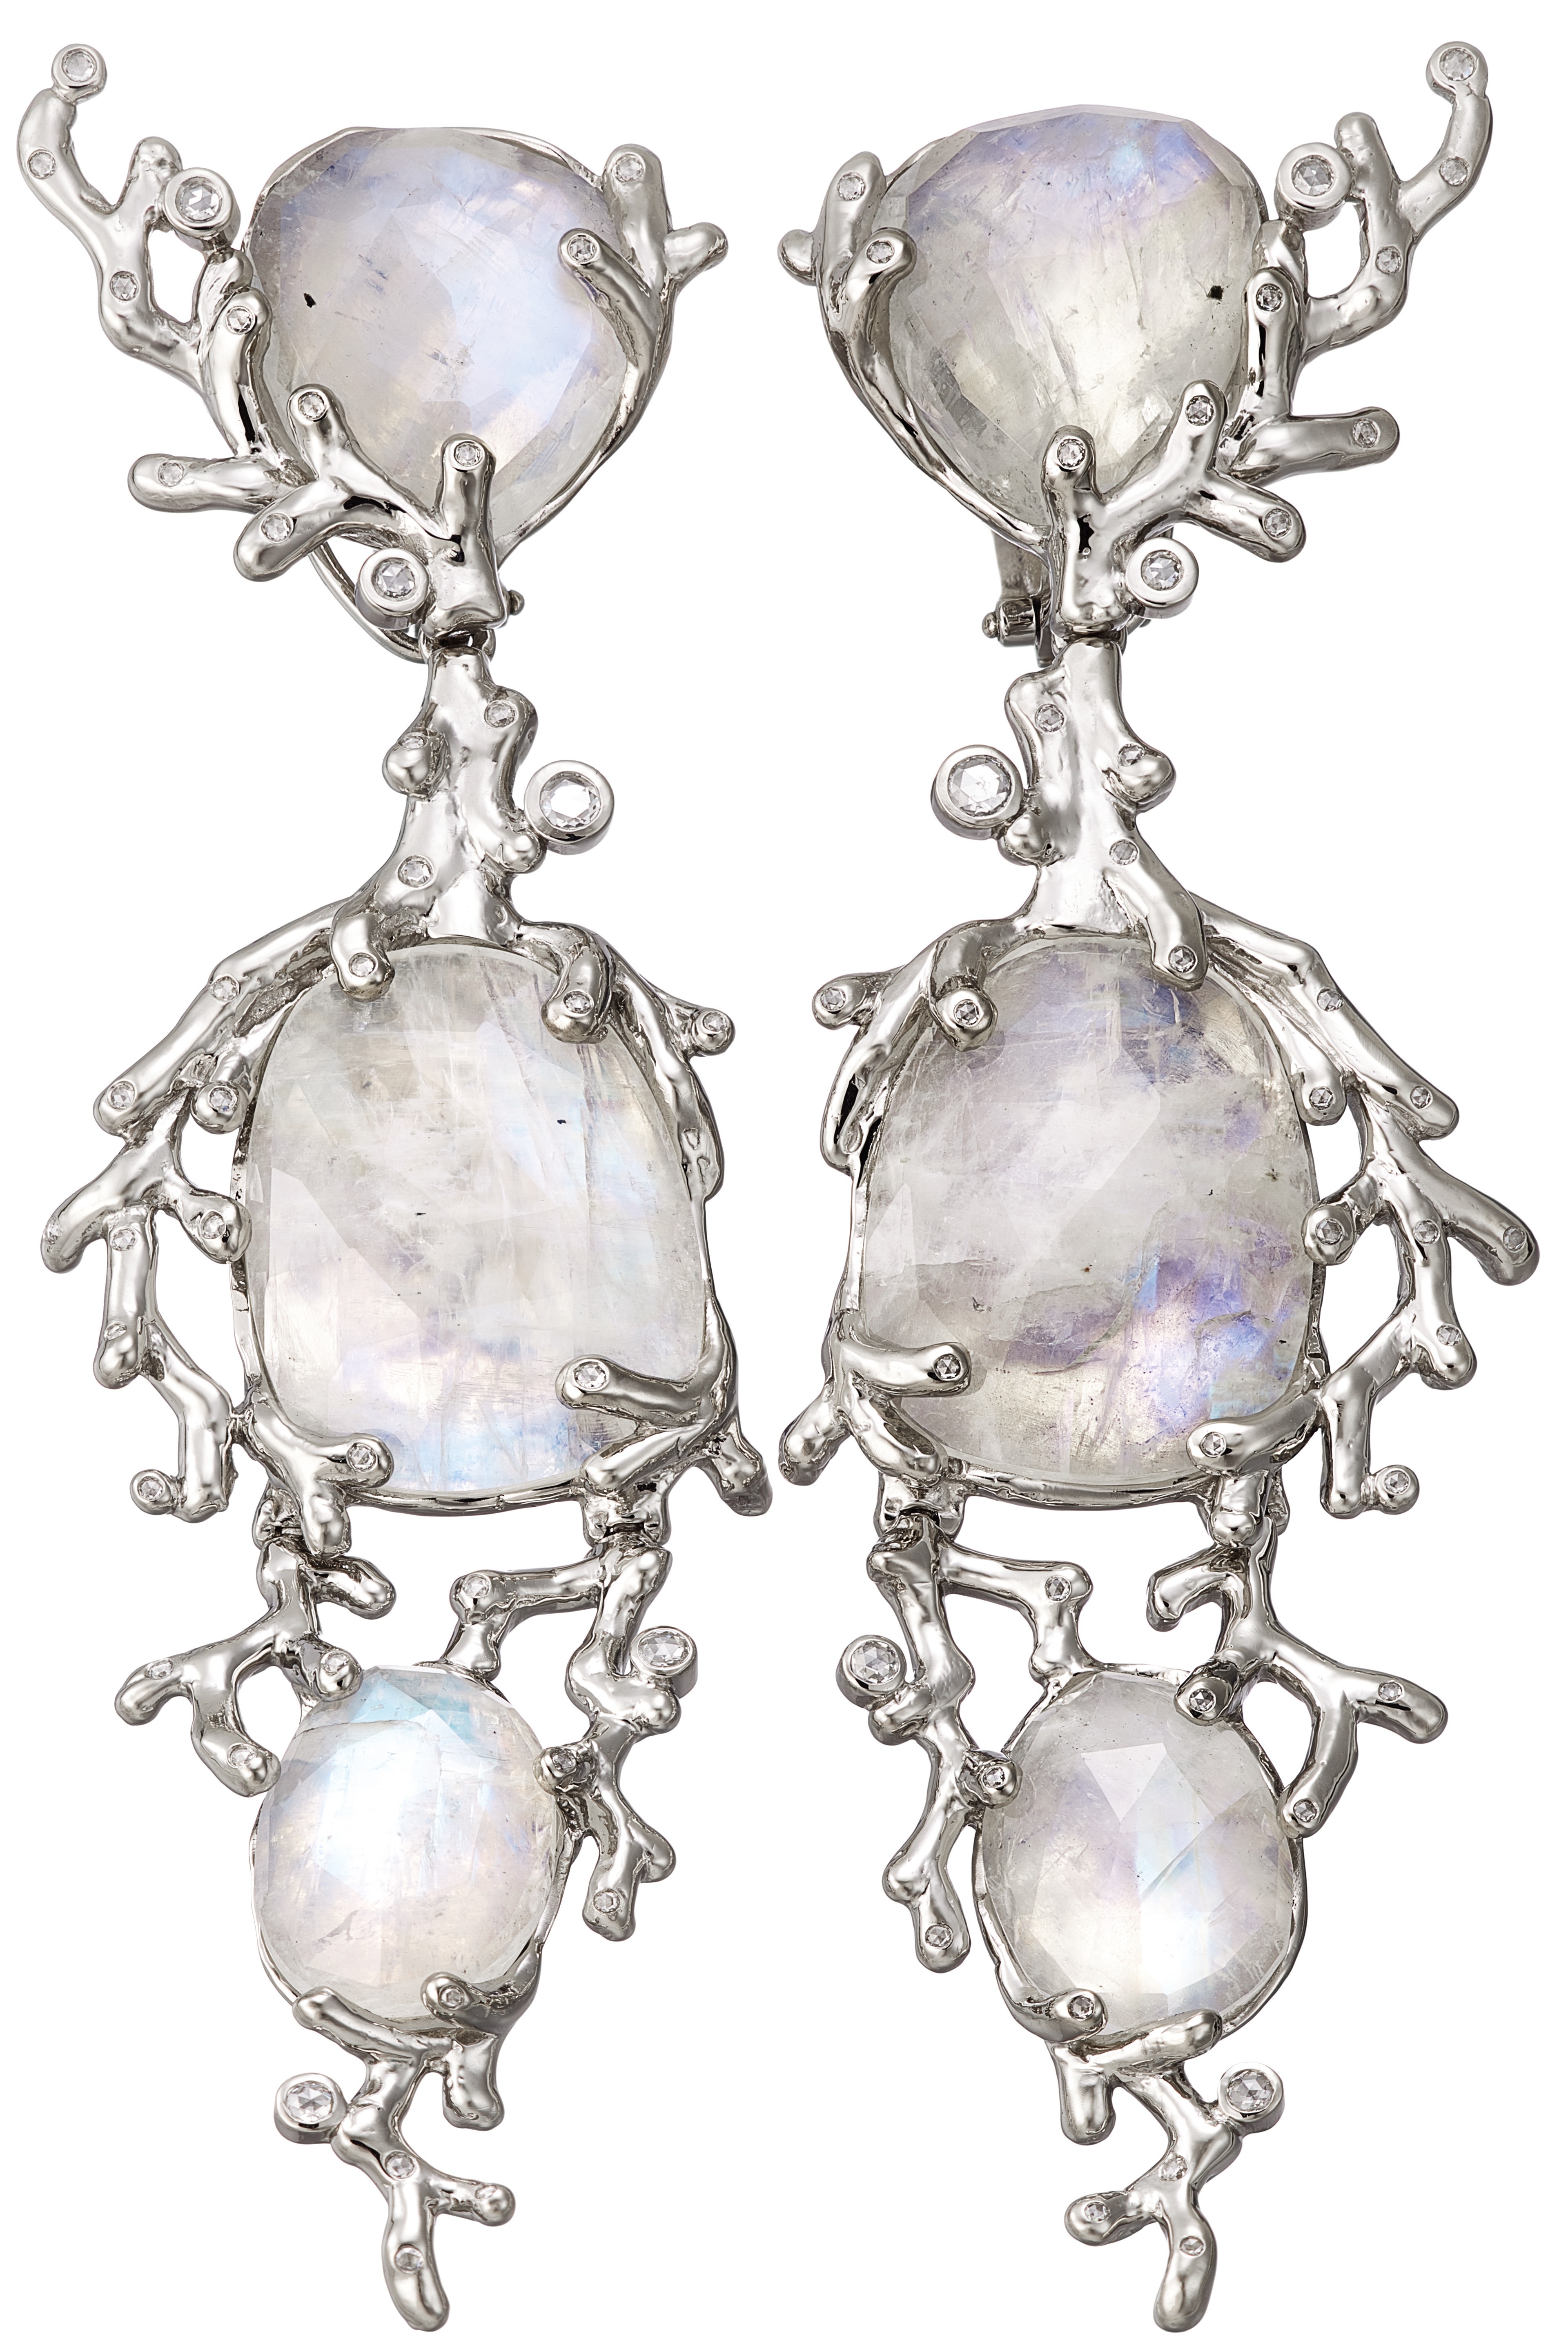 Set the tone for the season with the Paola Grande bracelet and Alaria moonstone earrings from Niin